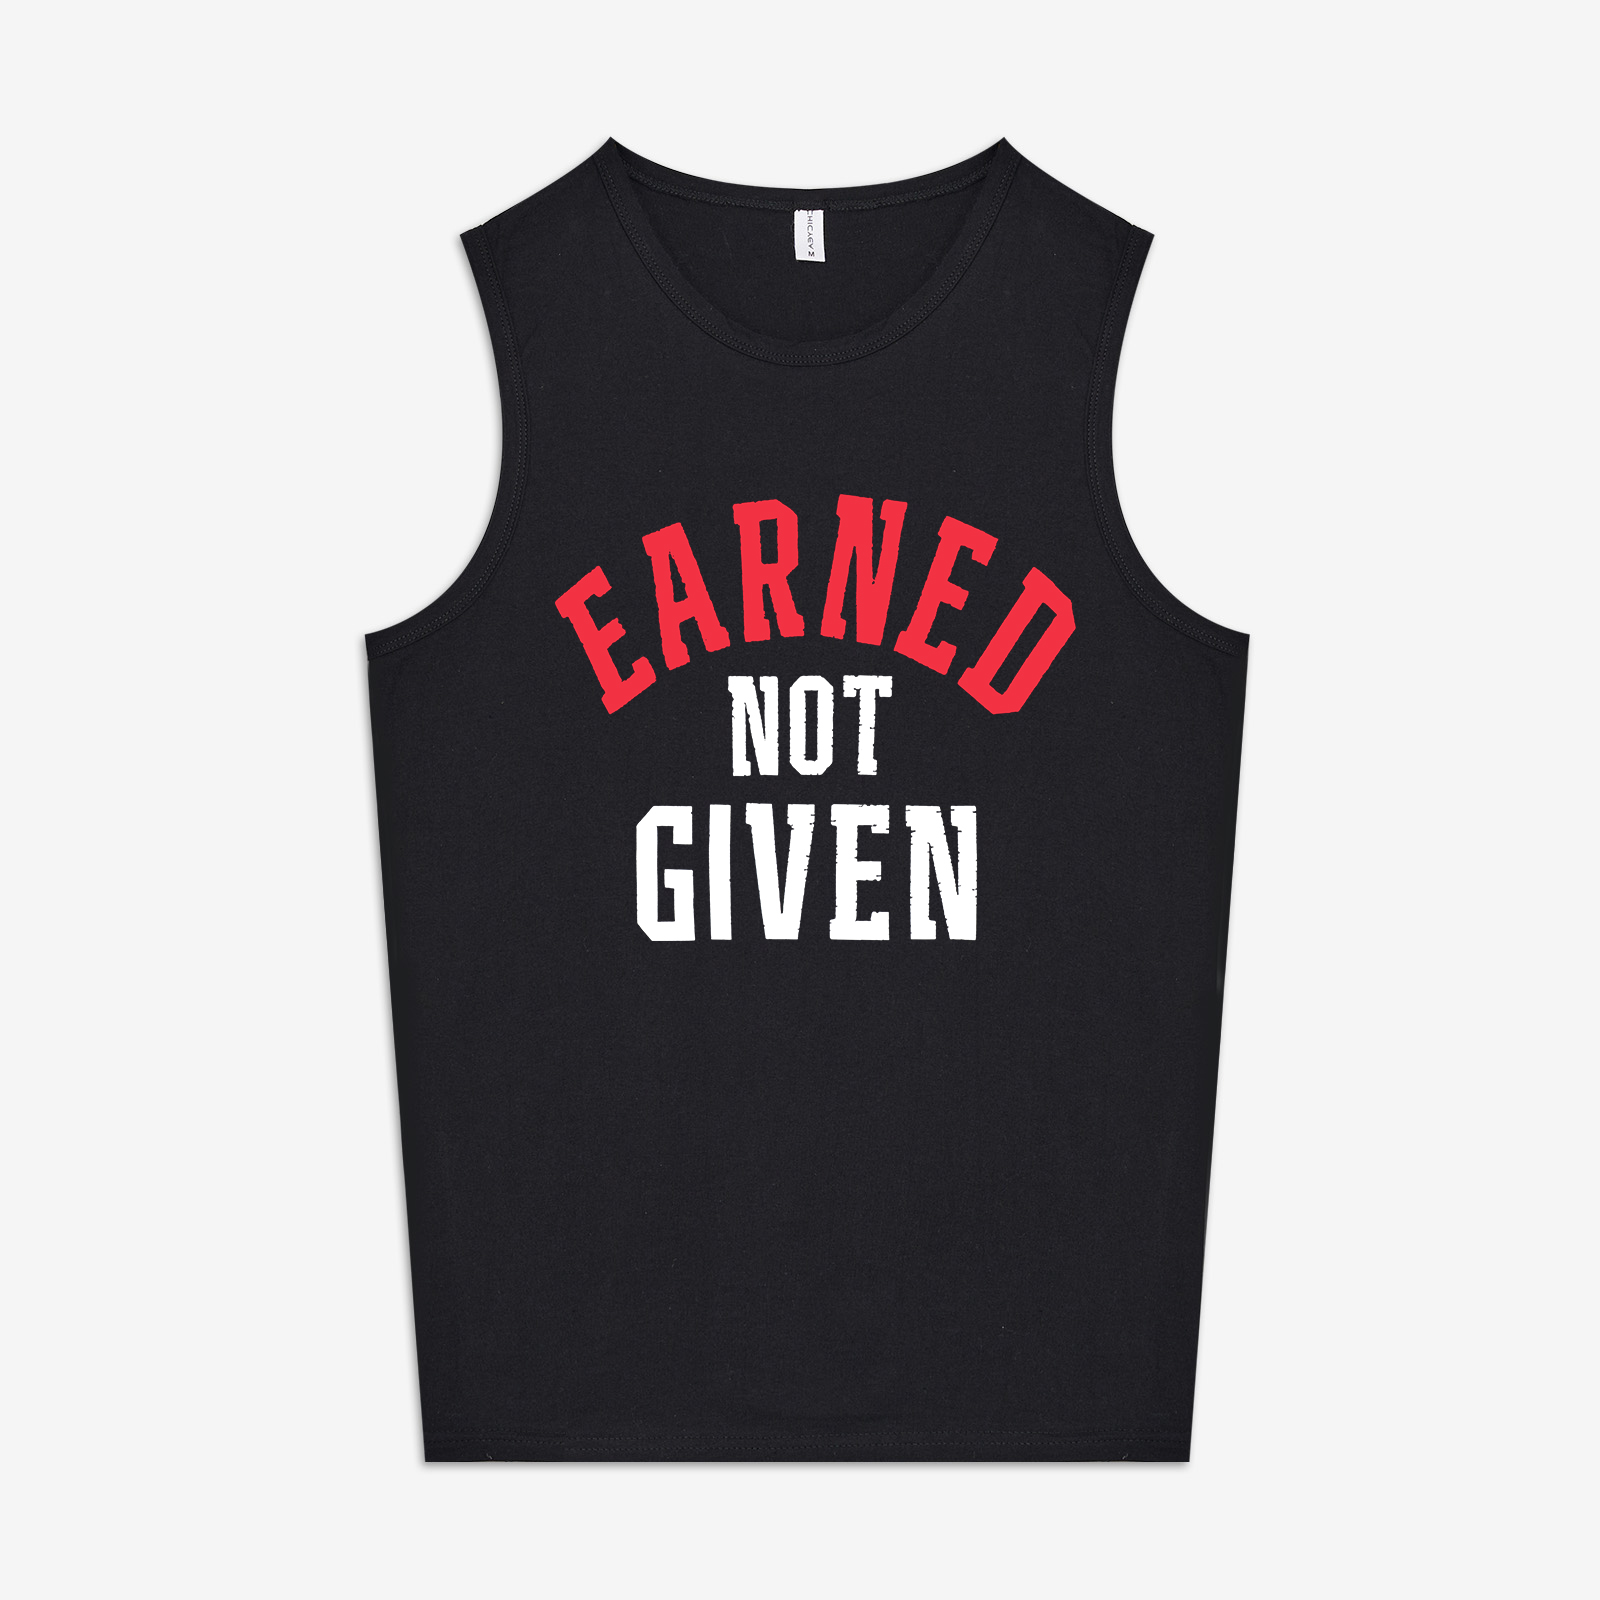 Earned Not Given Printed Women's Vest